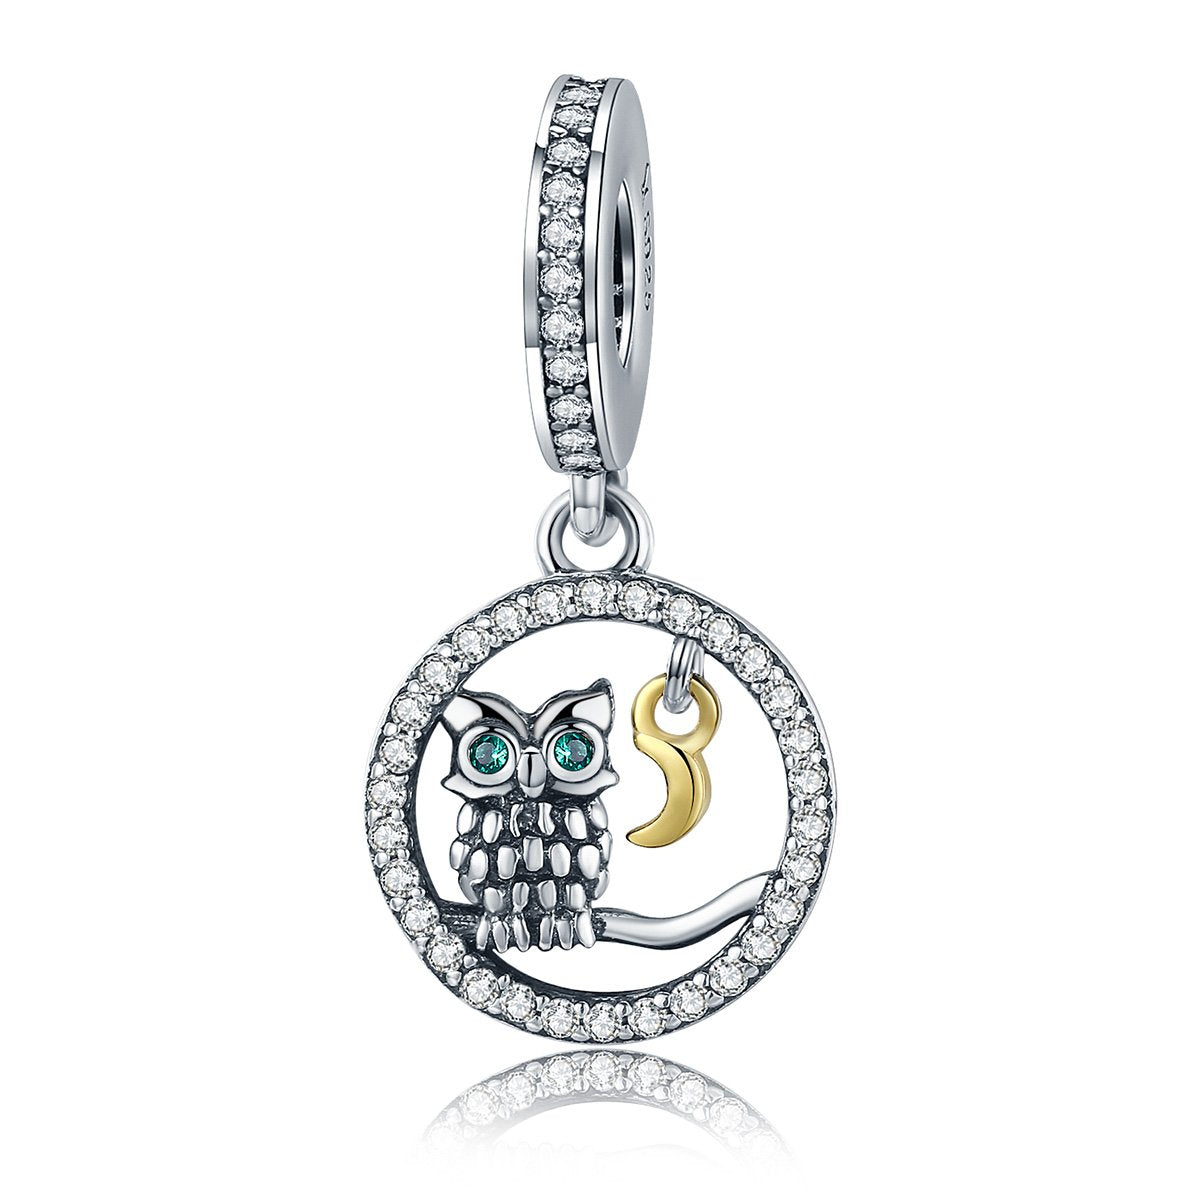 Sterling 925 silver charm the owl in cage puls bead pendant fits Pandora charm and European charm bracelet Xaxe.com